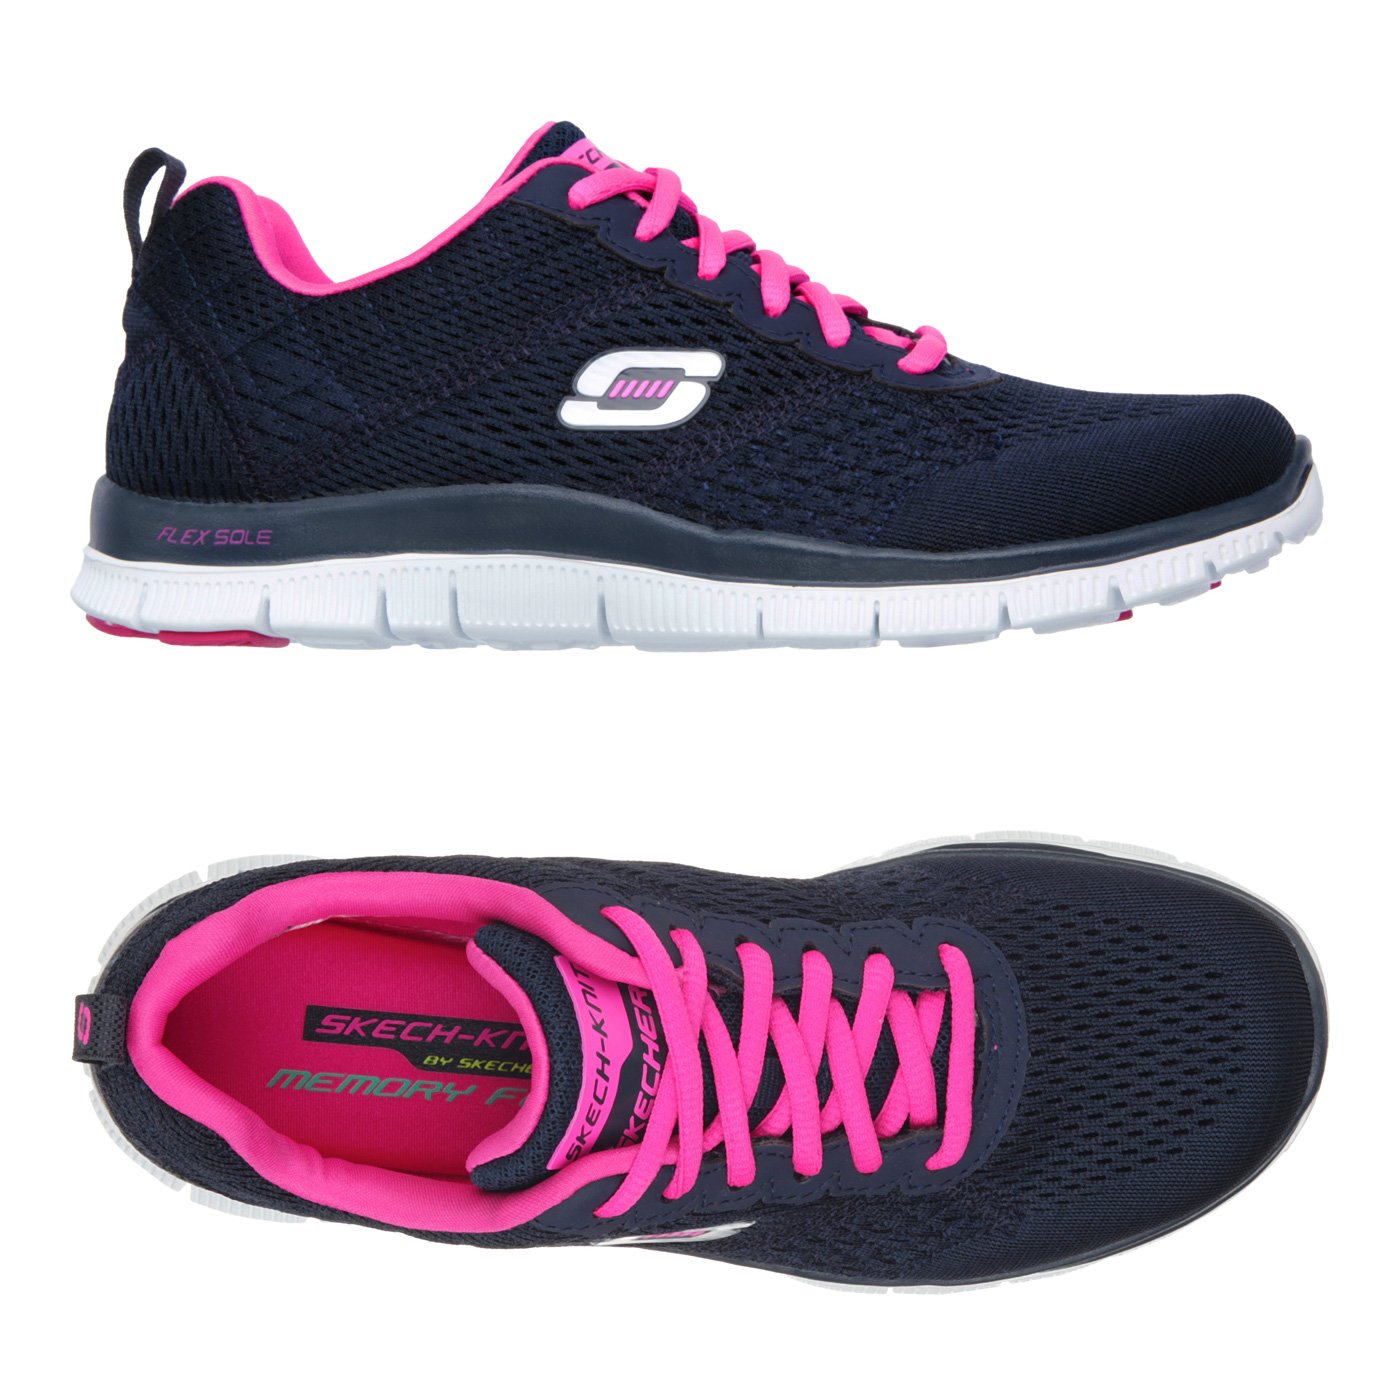 skechers flex appeal obvious choice